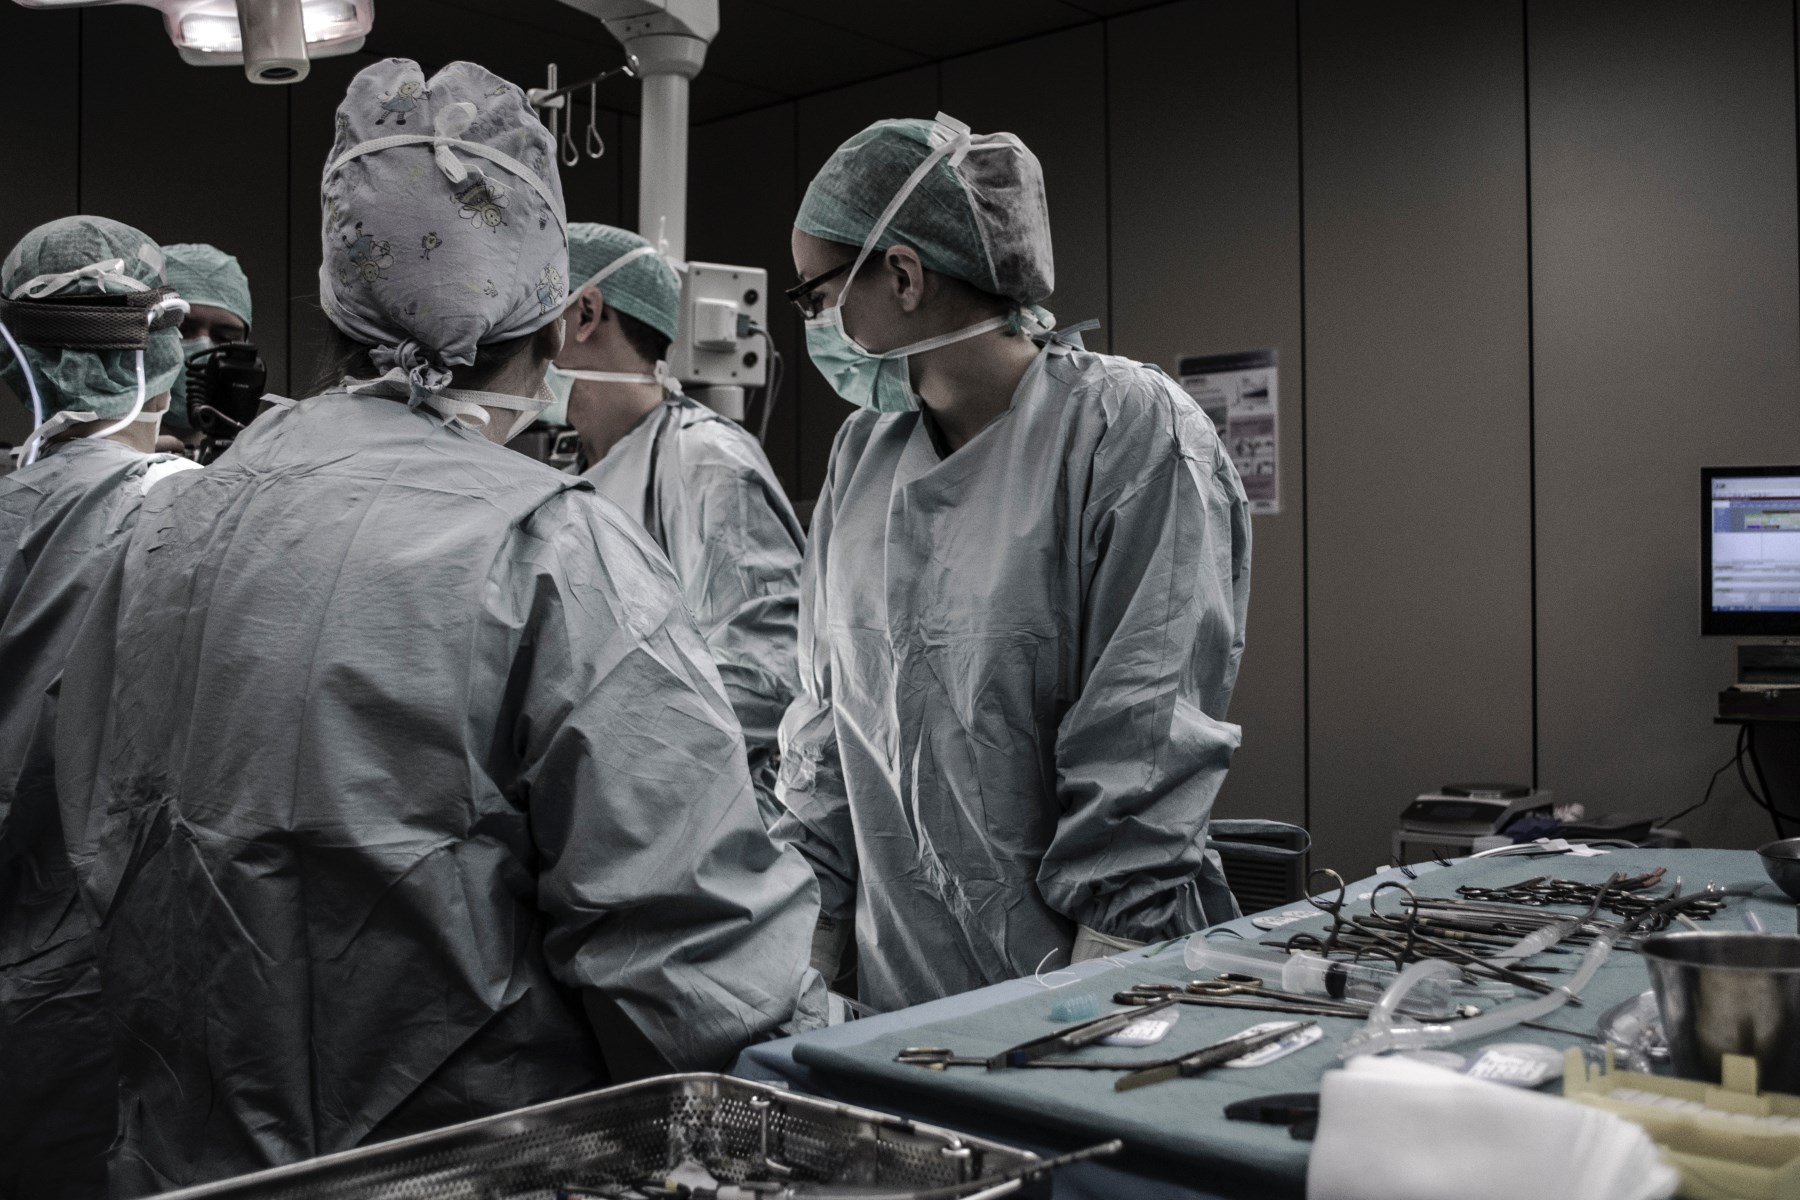 Will robots do the surgery in the future? Photo: [https://unsplash.com/photos/U4FyCp3-KzY Piron Guillaume]